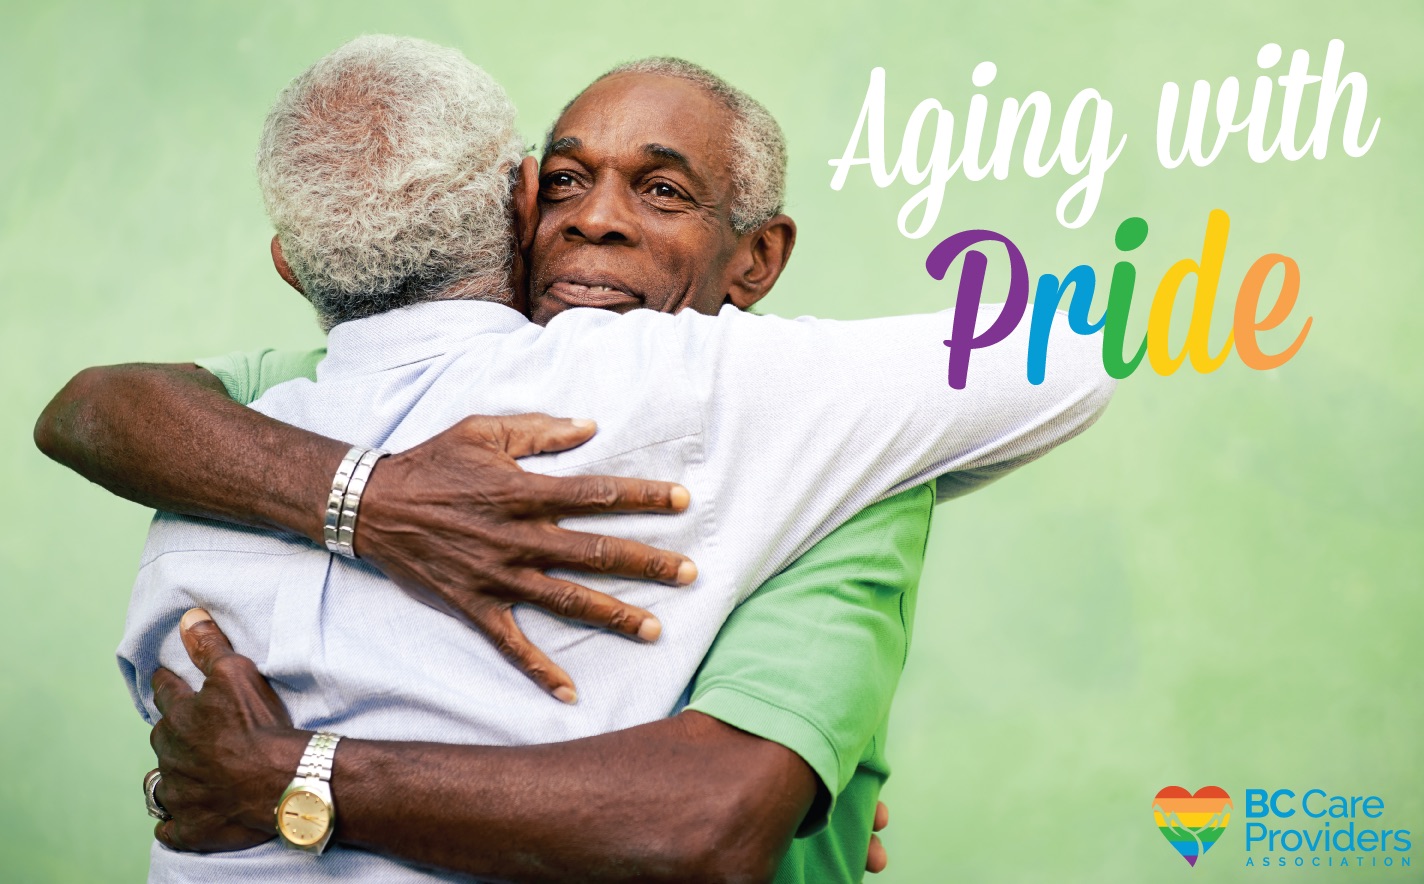 “Aging with Pride” initiative aims to strengthen LGBTQ2+ inclusiveness in B.C.’s continuing care sector